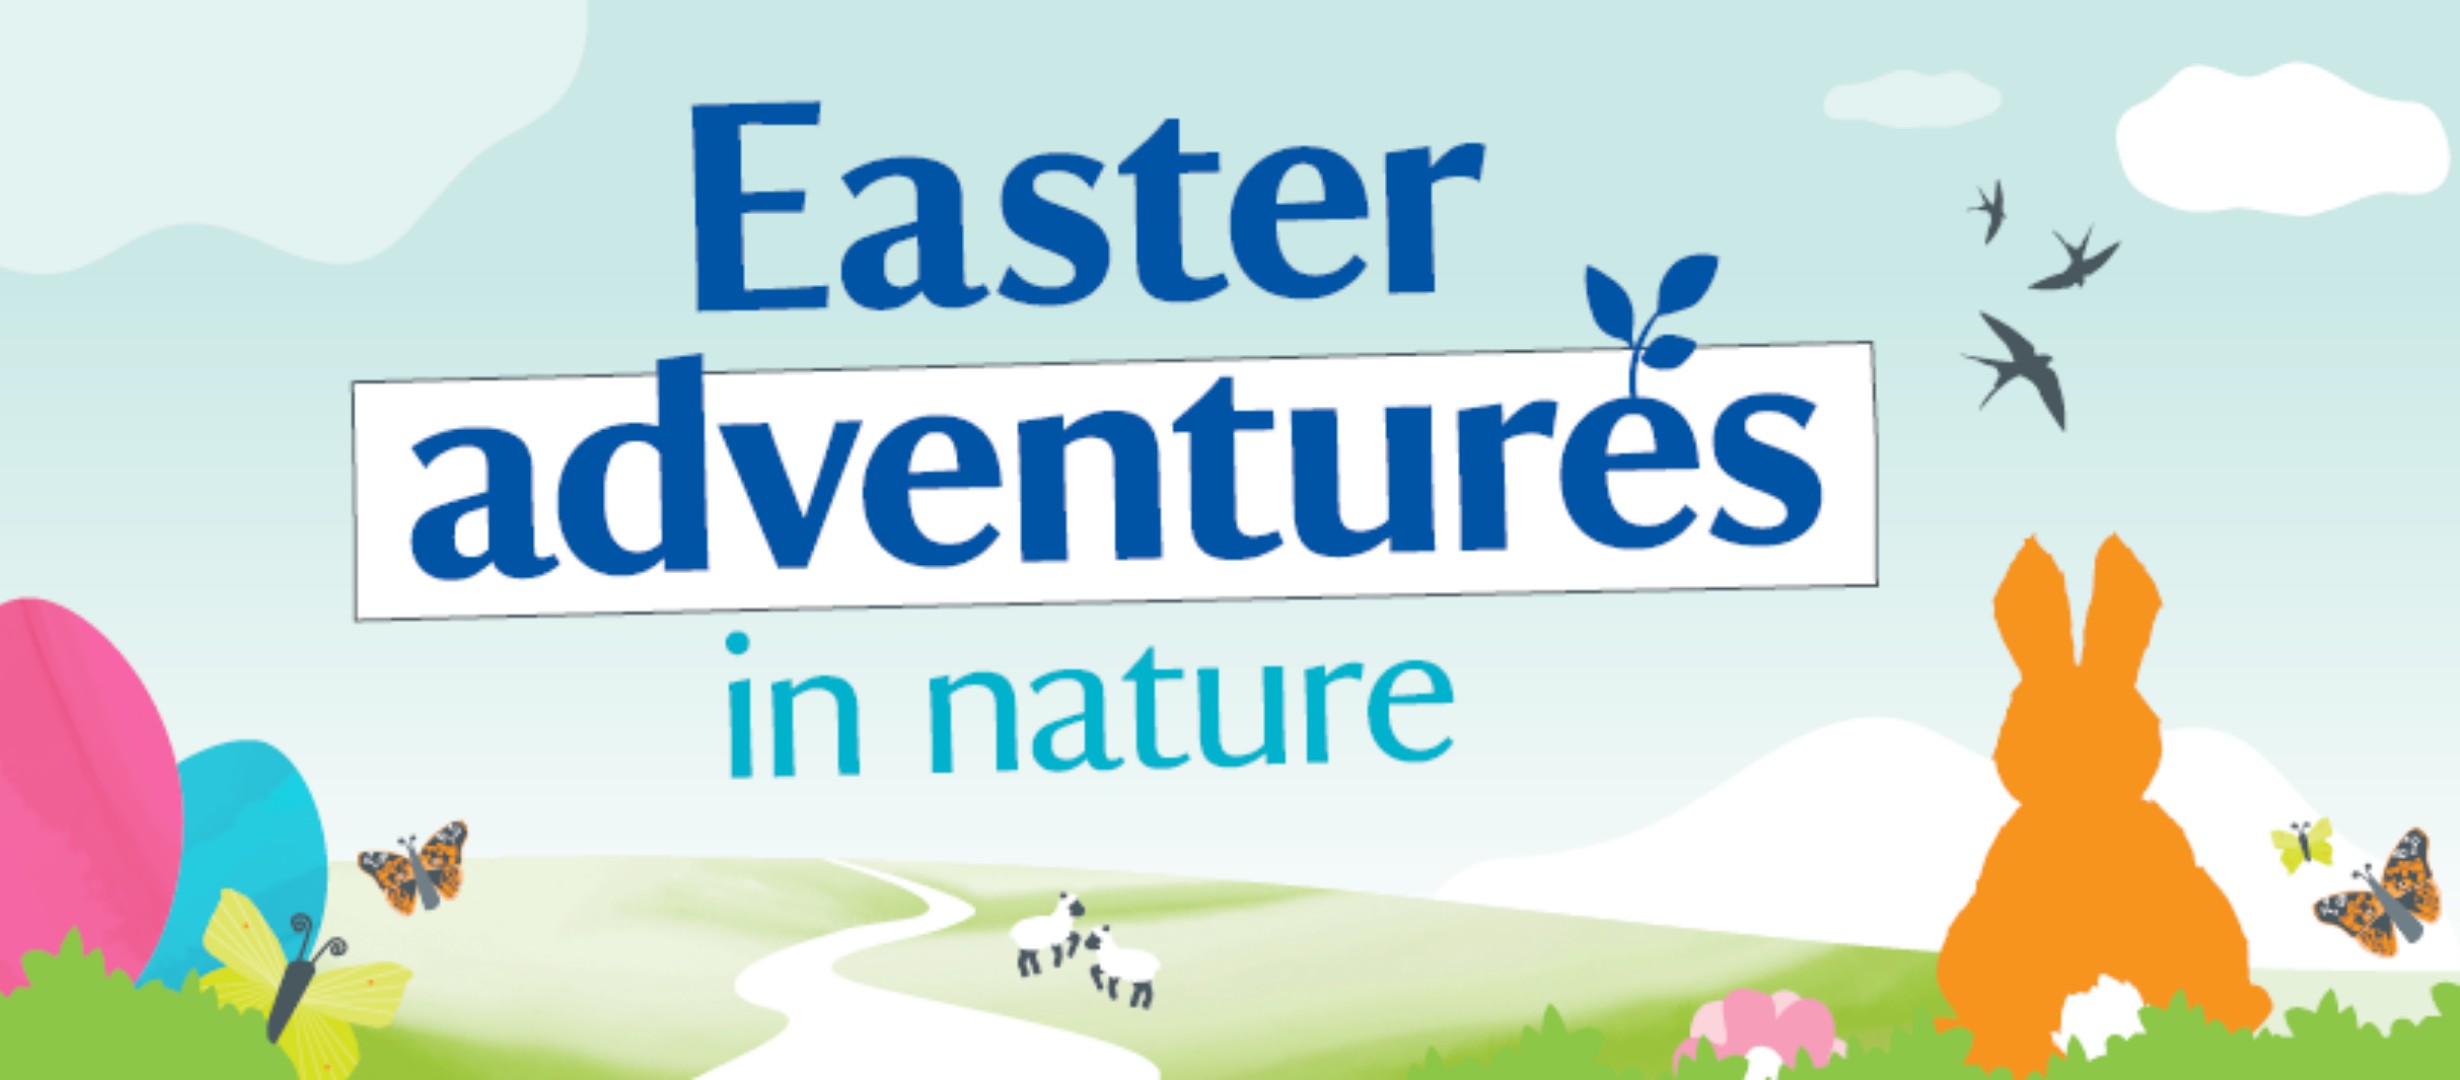 Easter adventures in nature at Hidcote